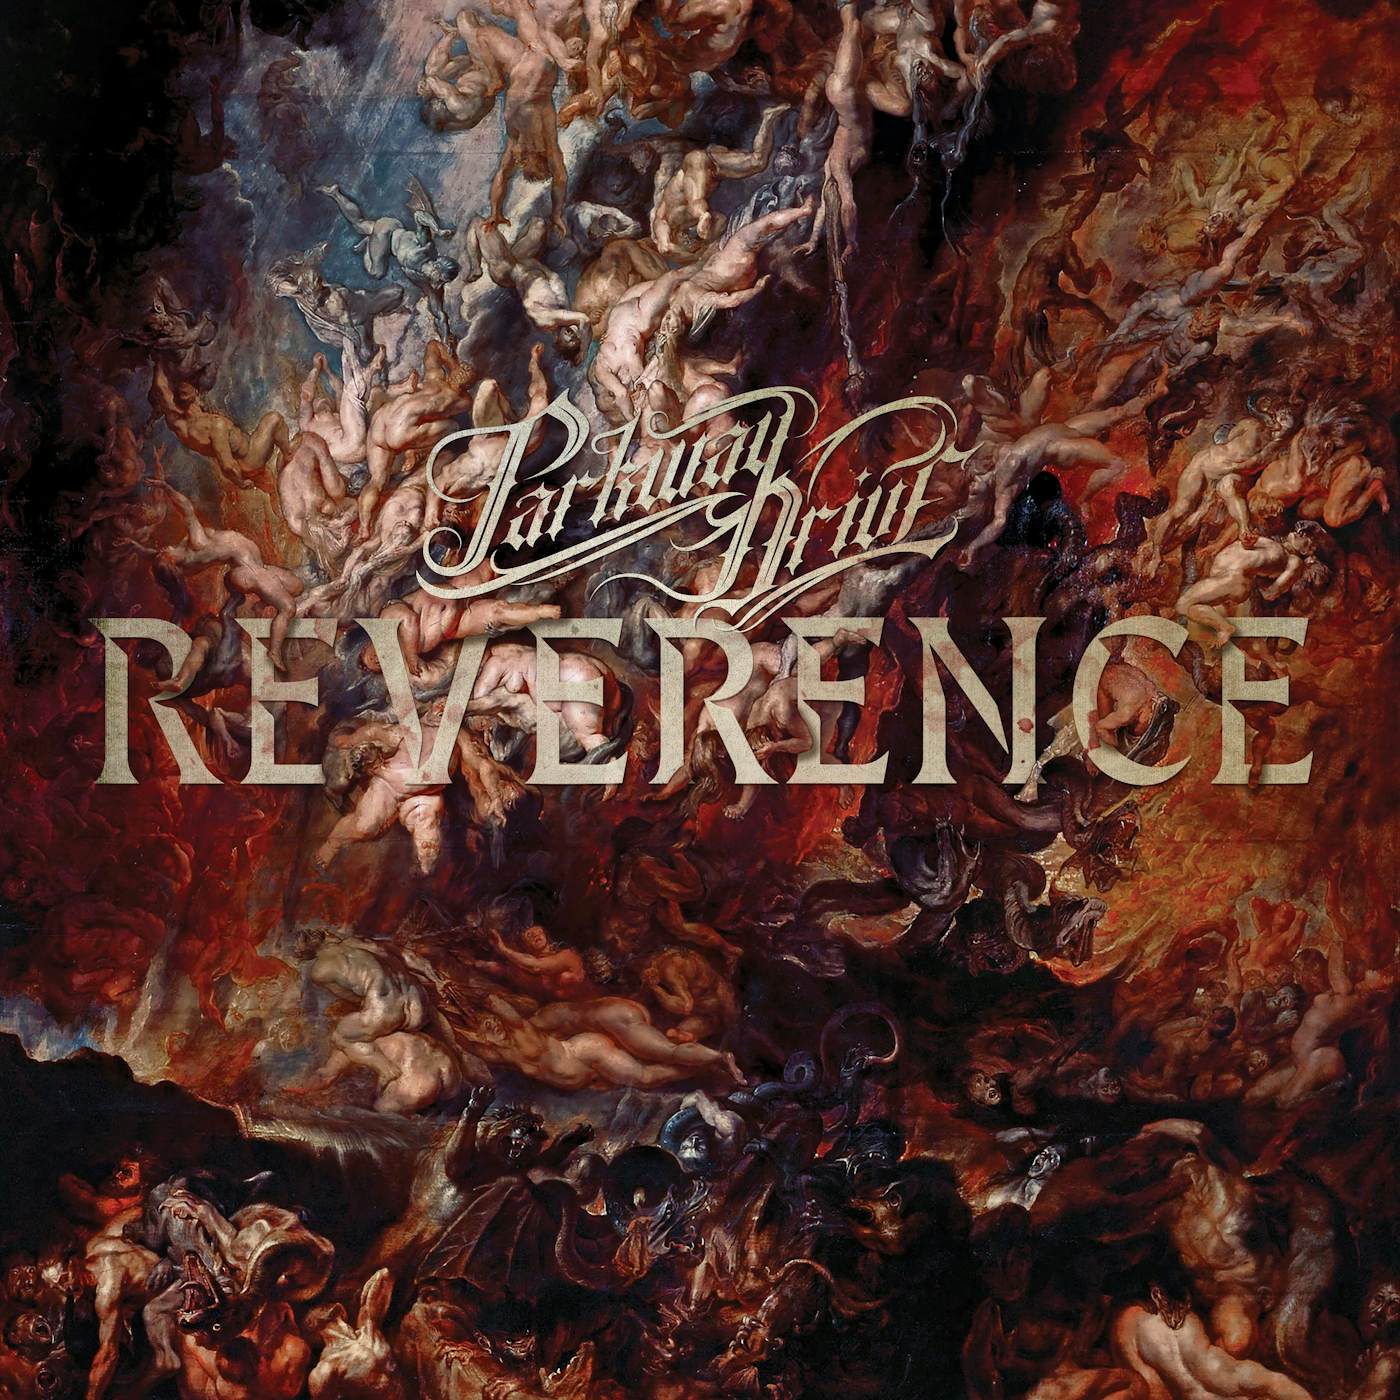 Parkway Drive REVERENCE CD